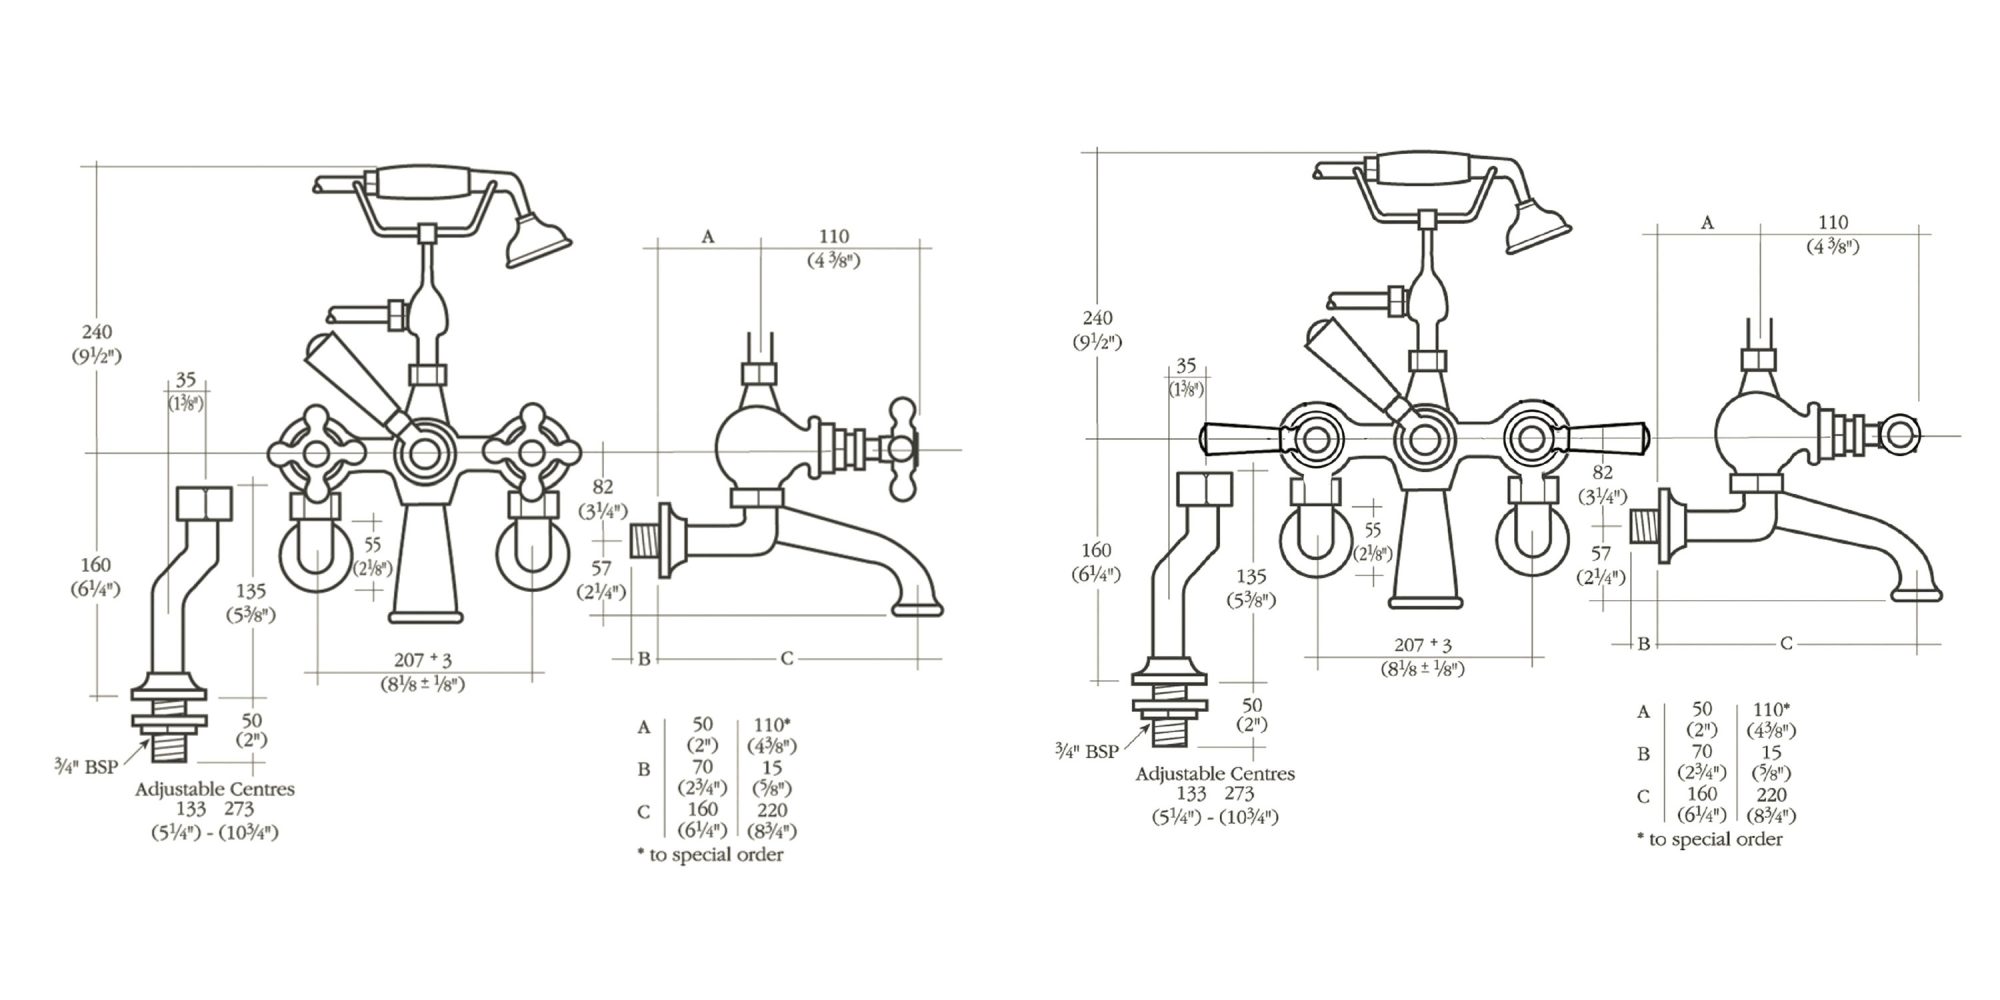 R4308 1890 technical drawings